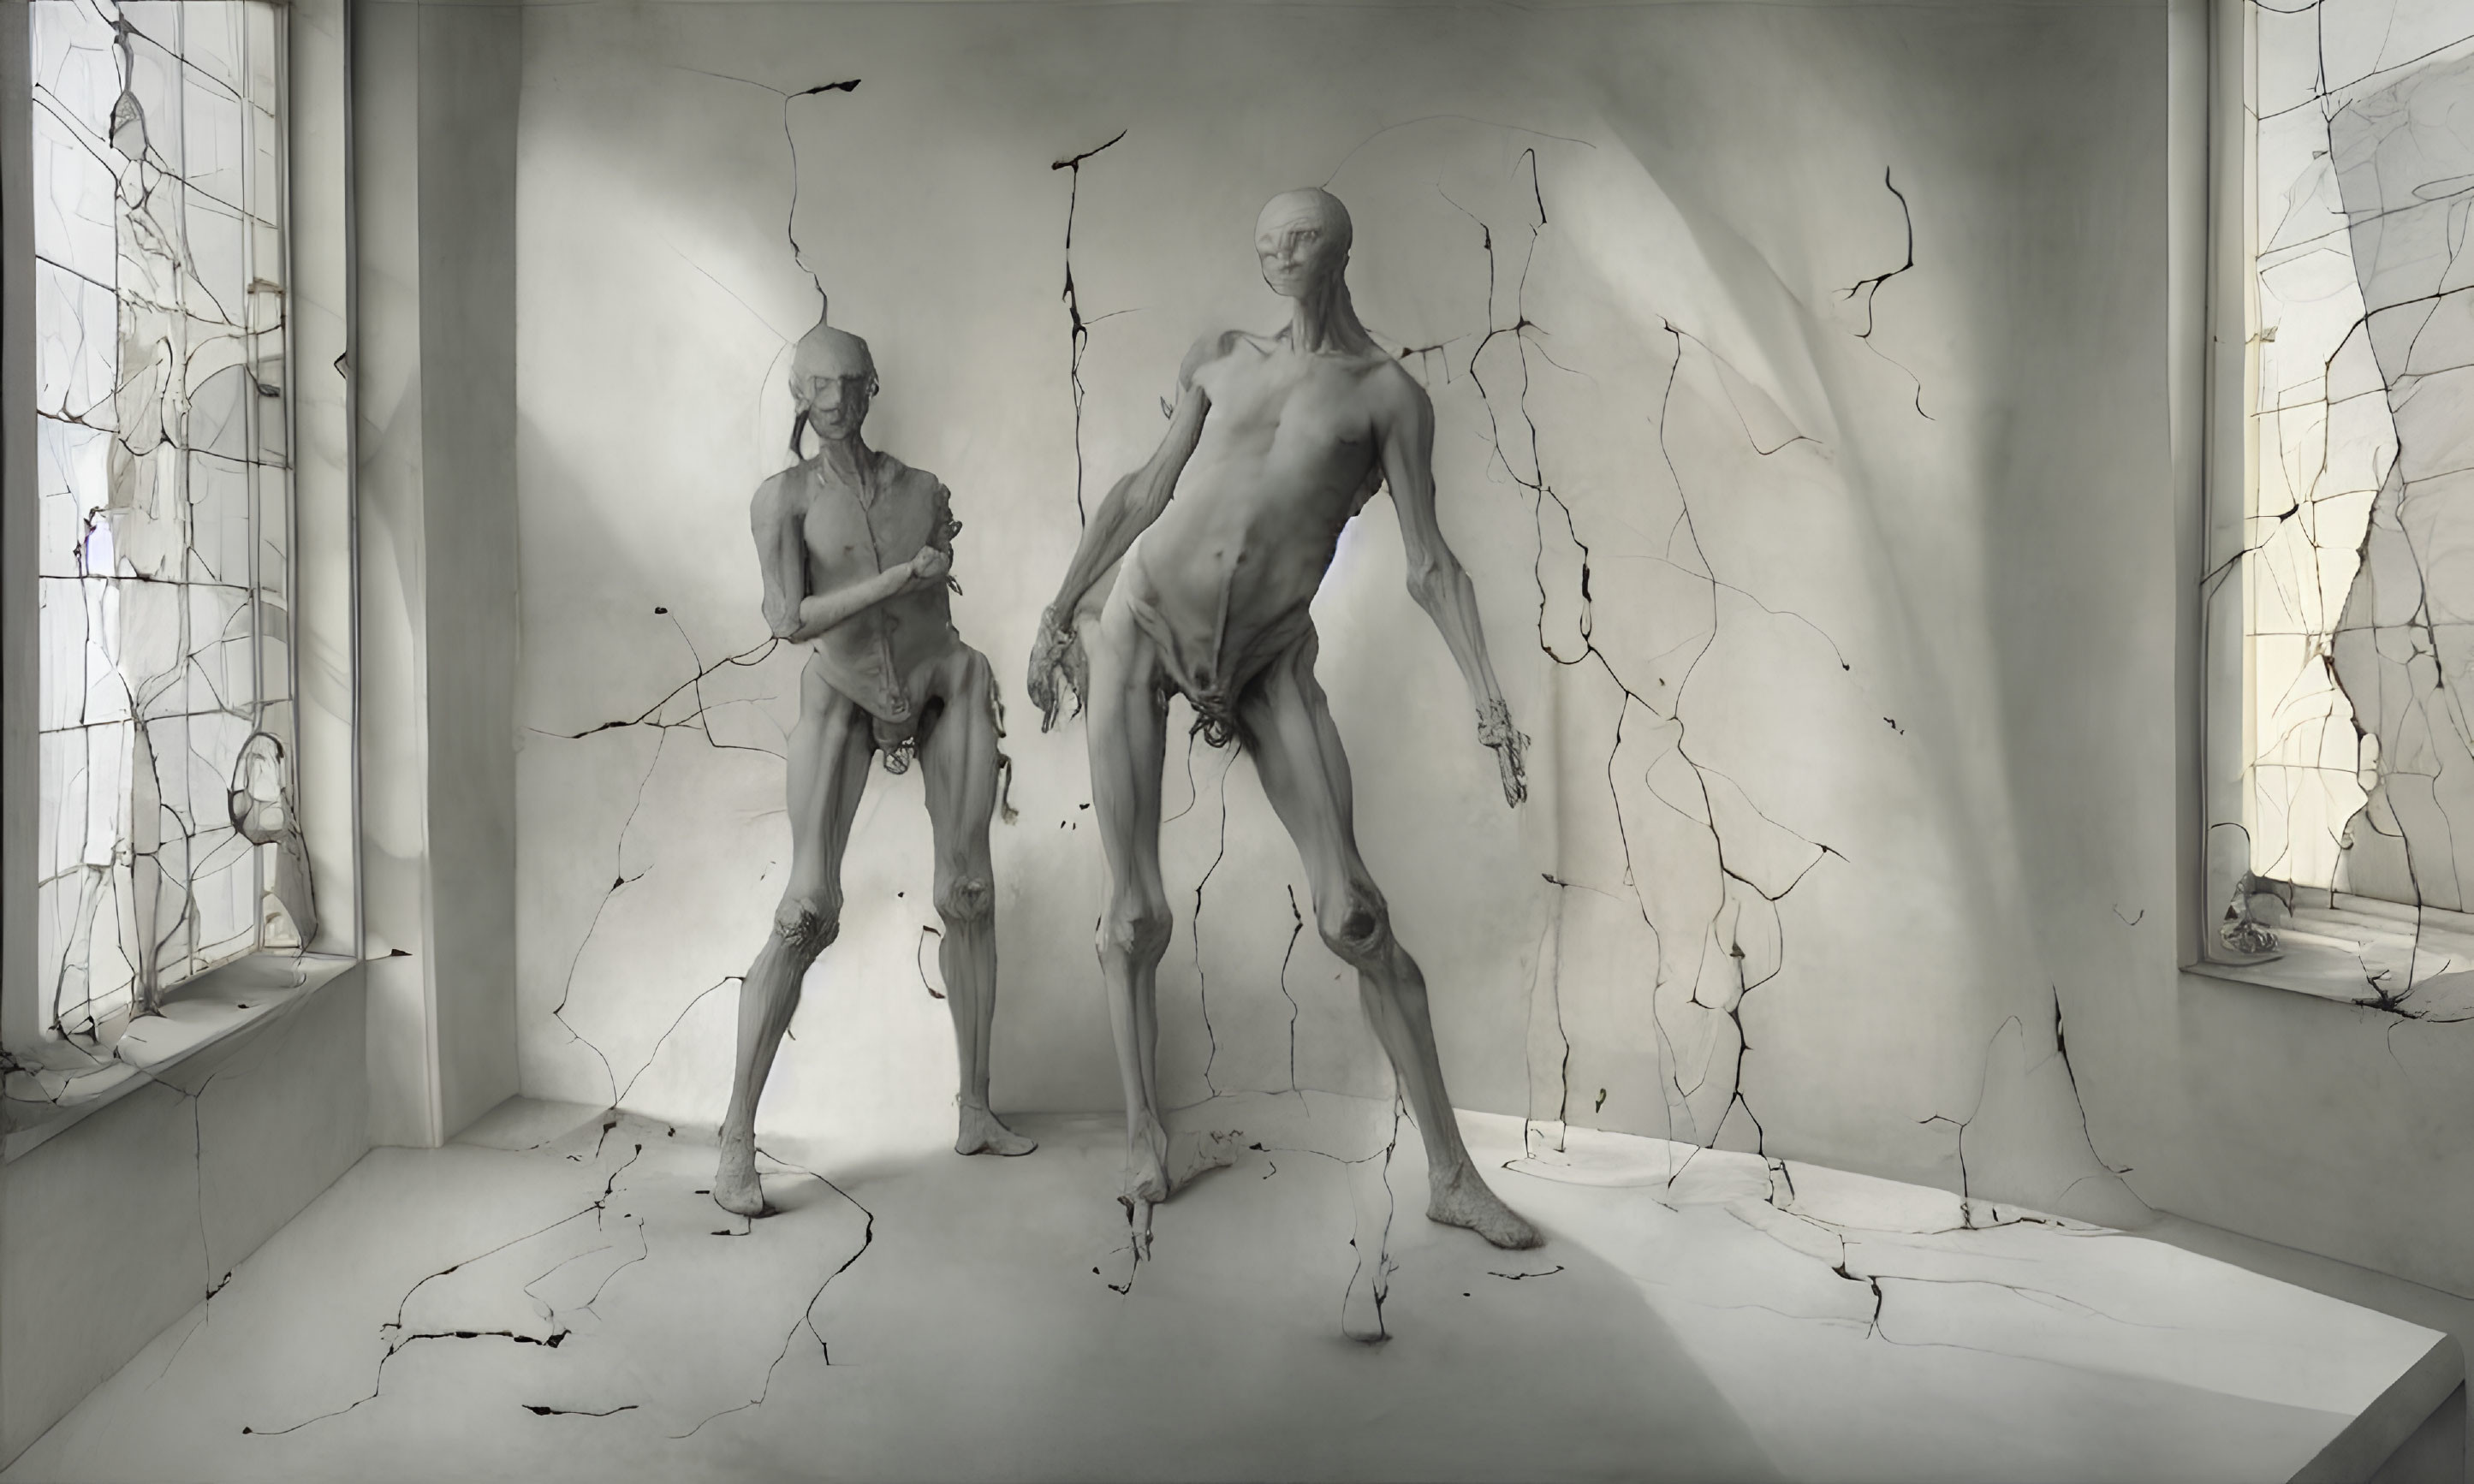 Humanoid sculptures disintegrating into branches in dilapidated room